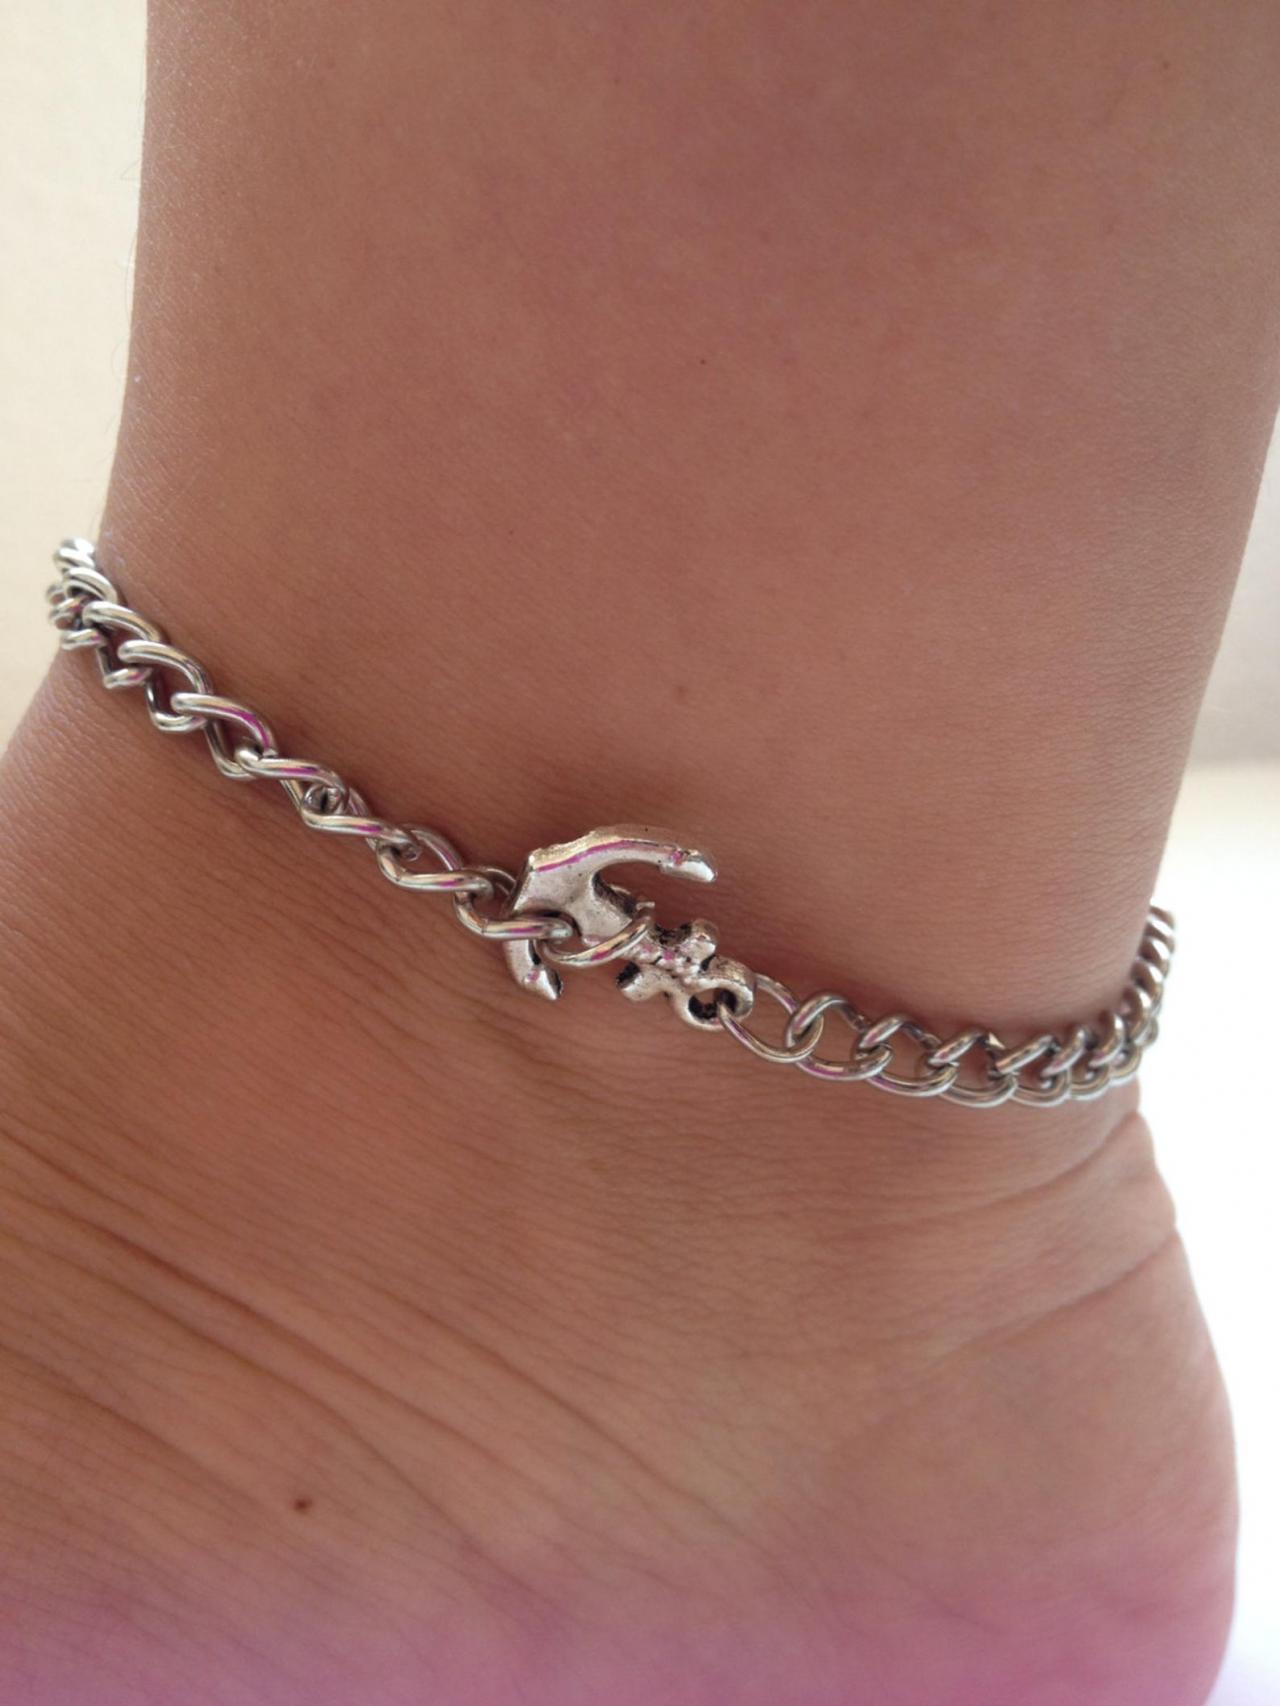 Anchor chain Anklet 25- friendship metal chain cuff anchor anklet gift adjustable current womenswear unique innovative